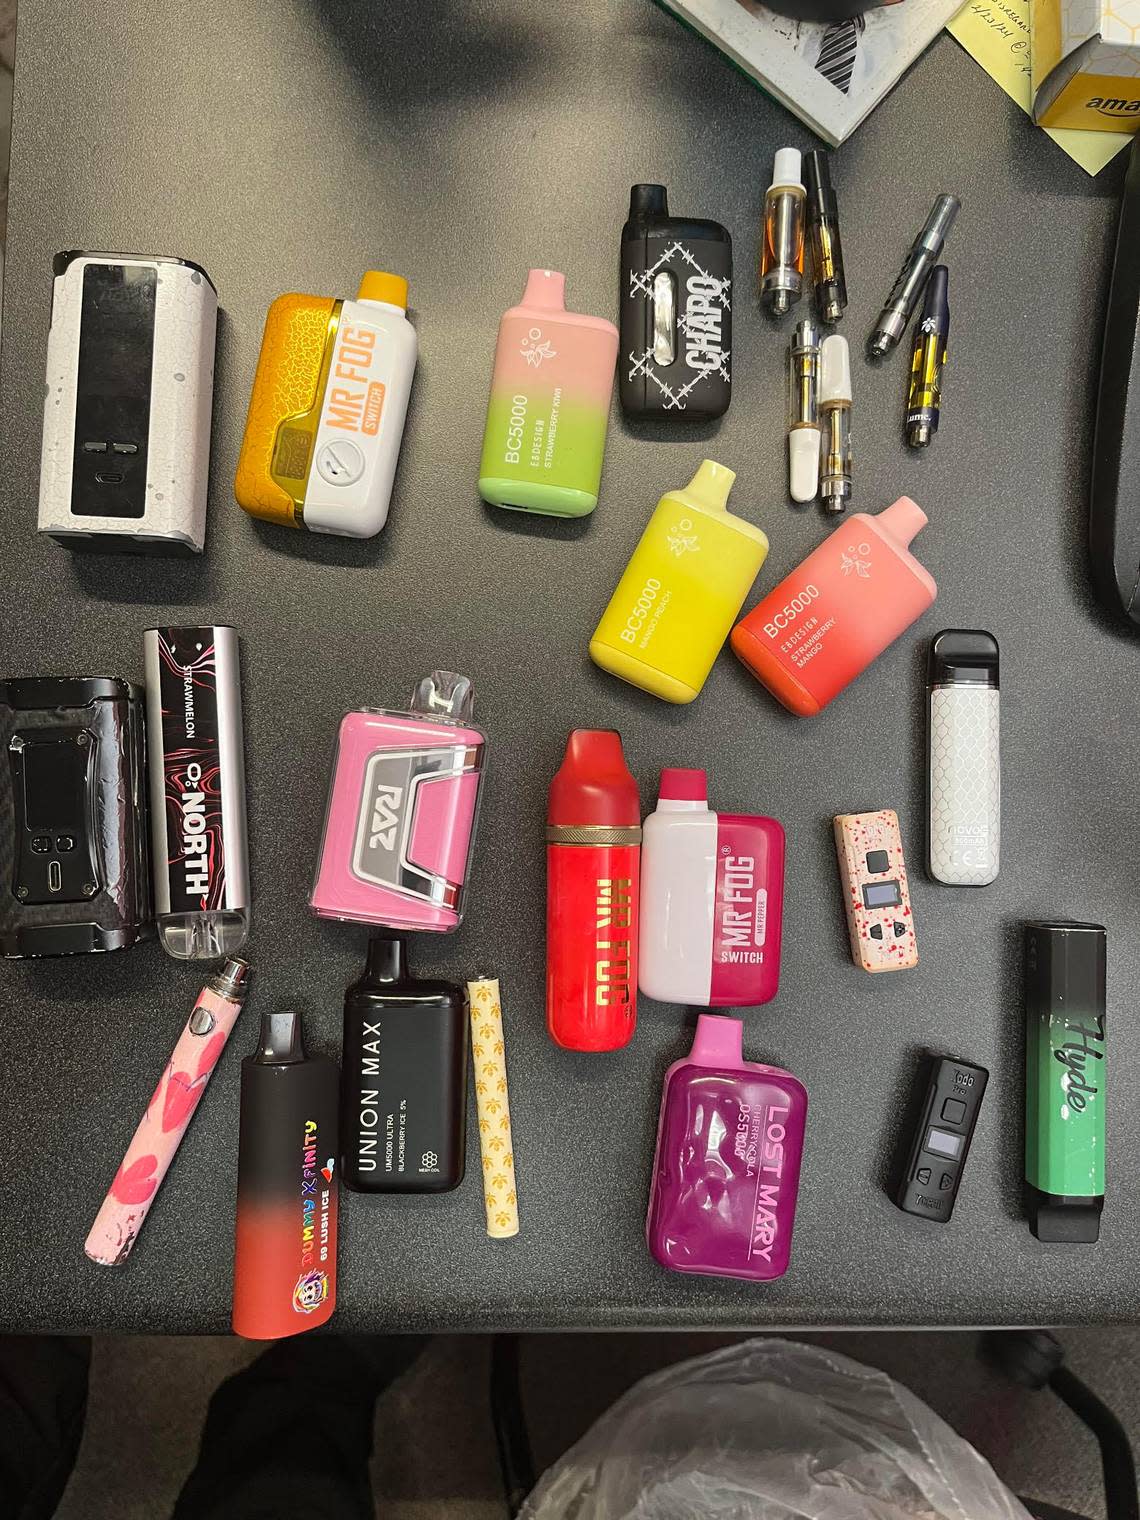 Vape products confiscated from students in Kenton County public schools.